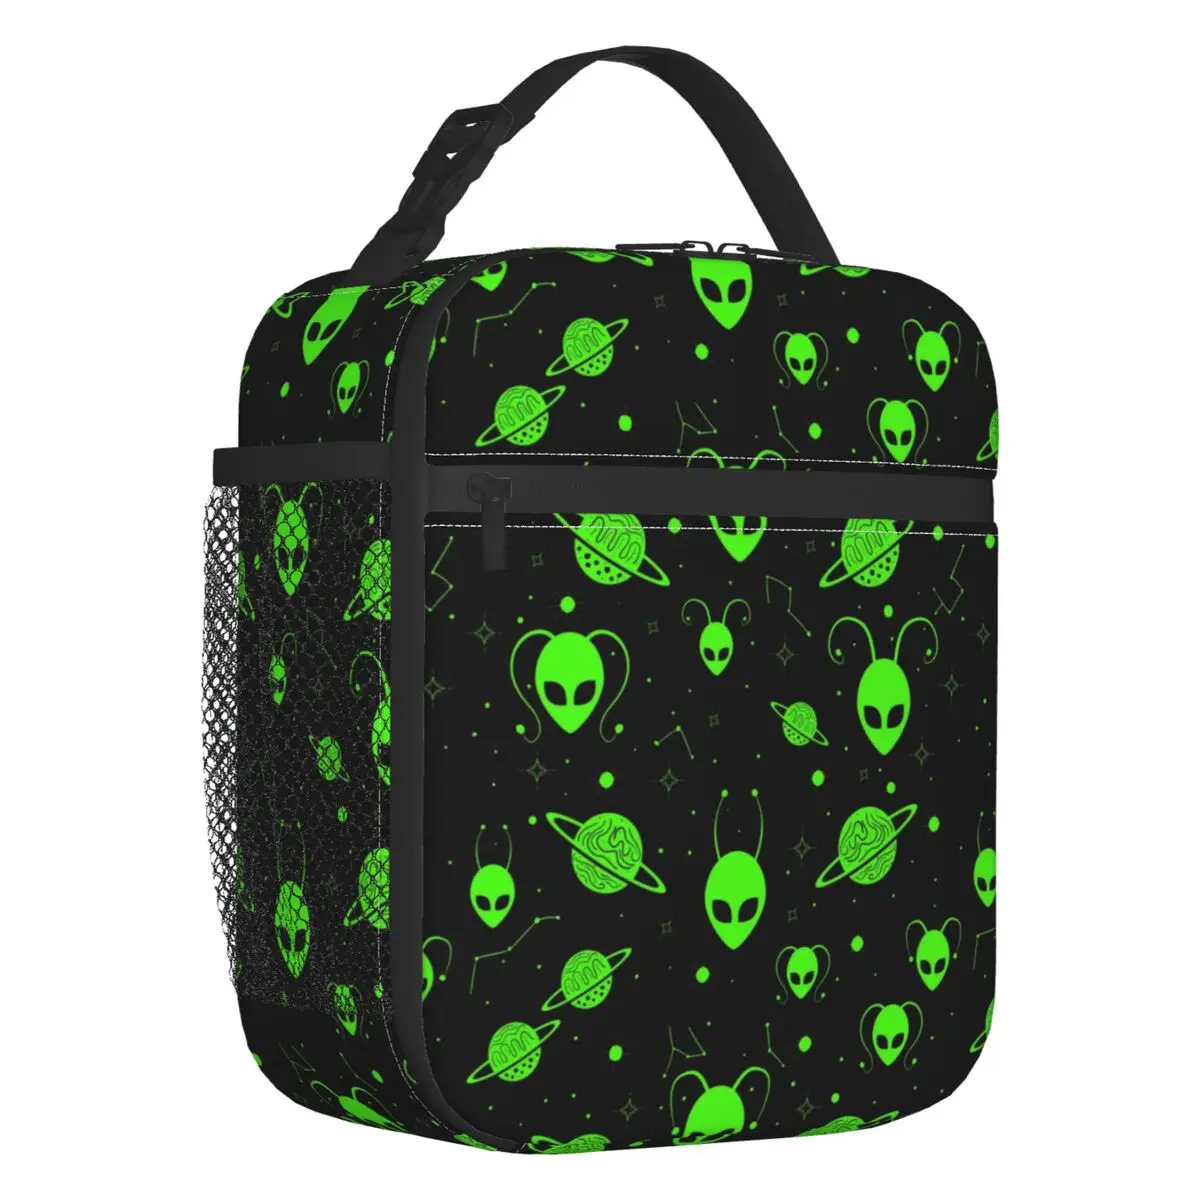 

Custom Wonderful Green Alien Universe Wondrous Cosmos With Planet Stars Lunch Bag Men Women Cooler Thermal Insulated Lunch Box